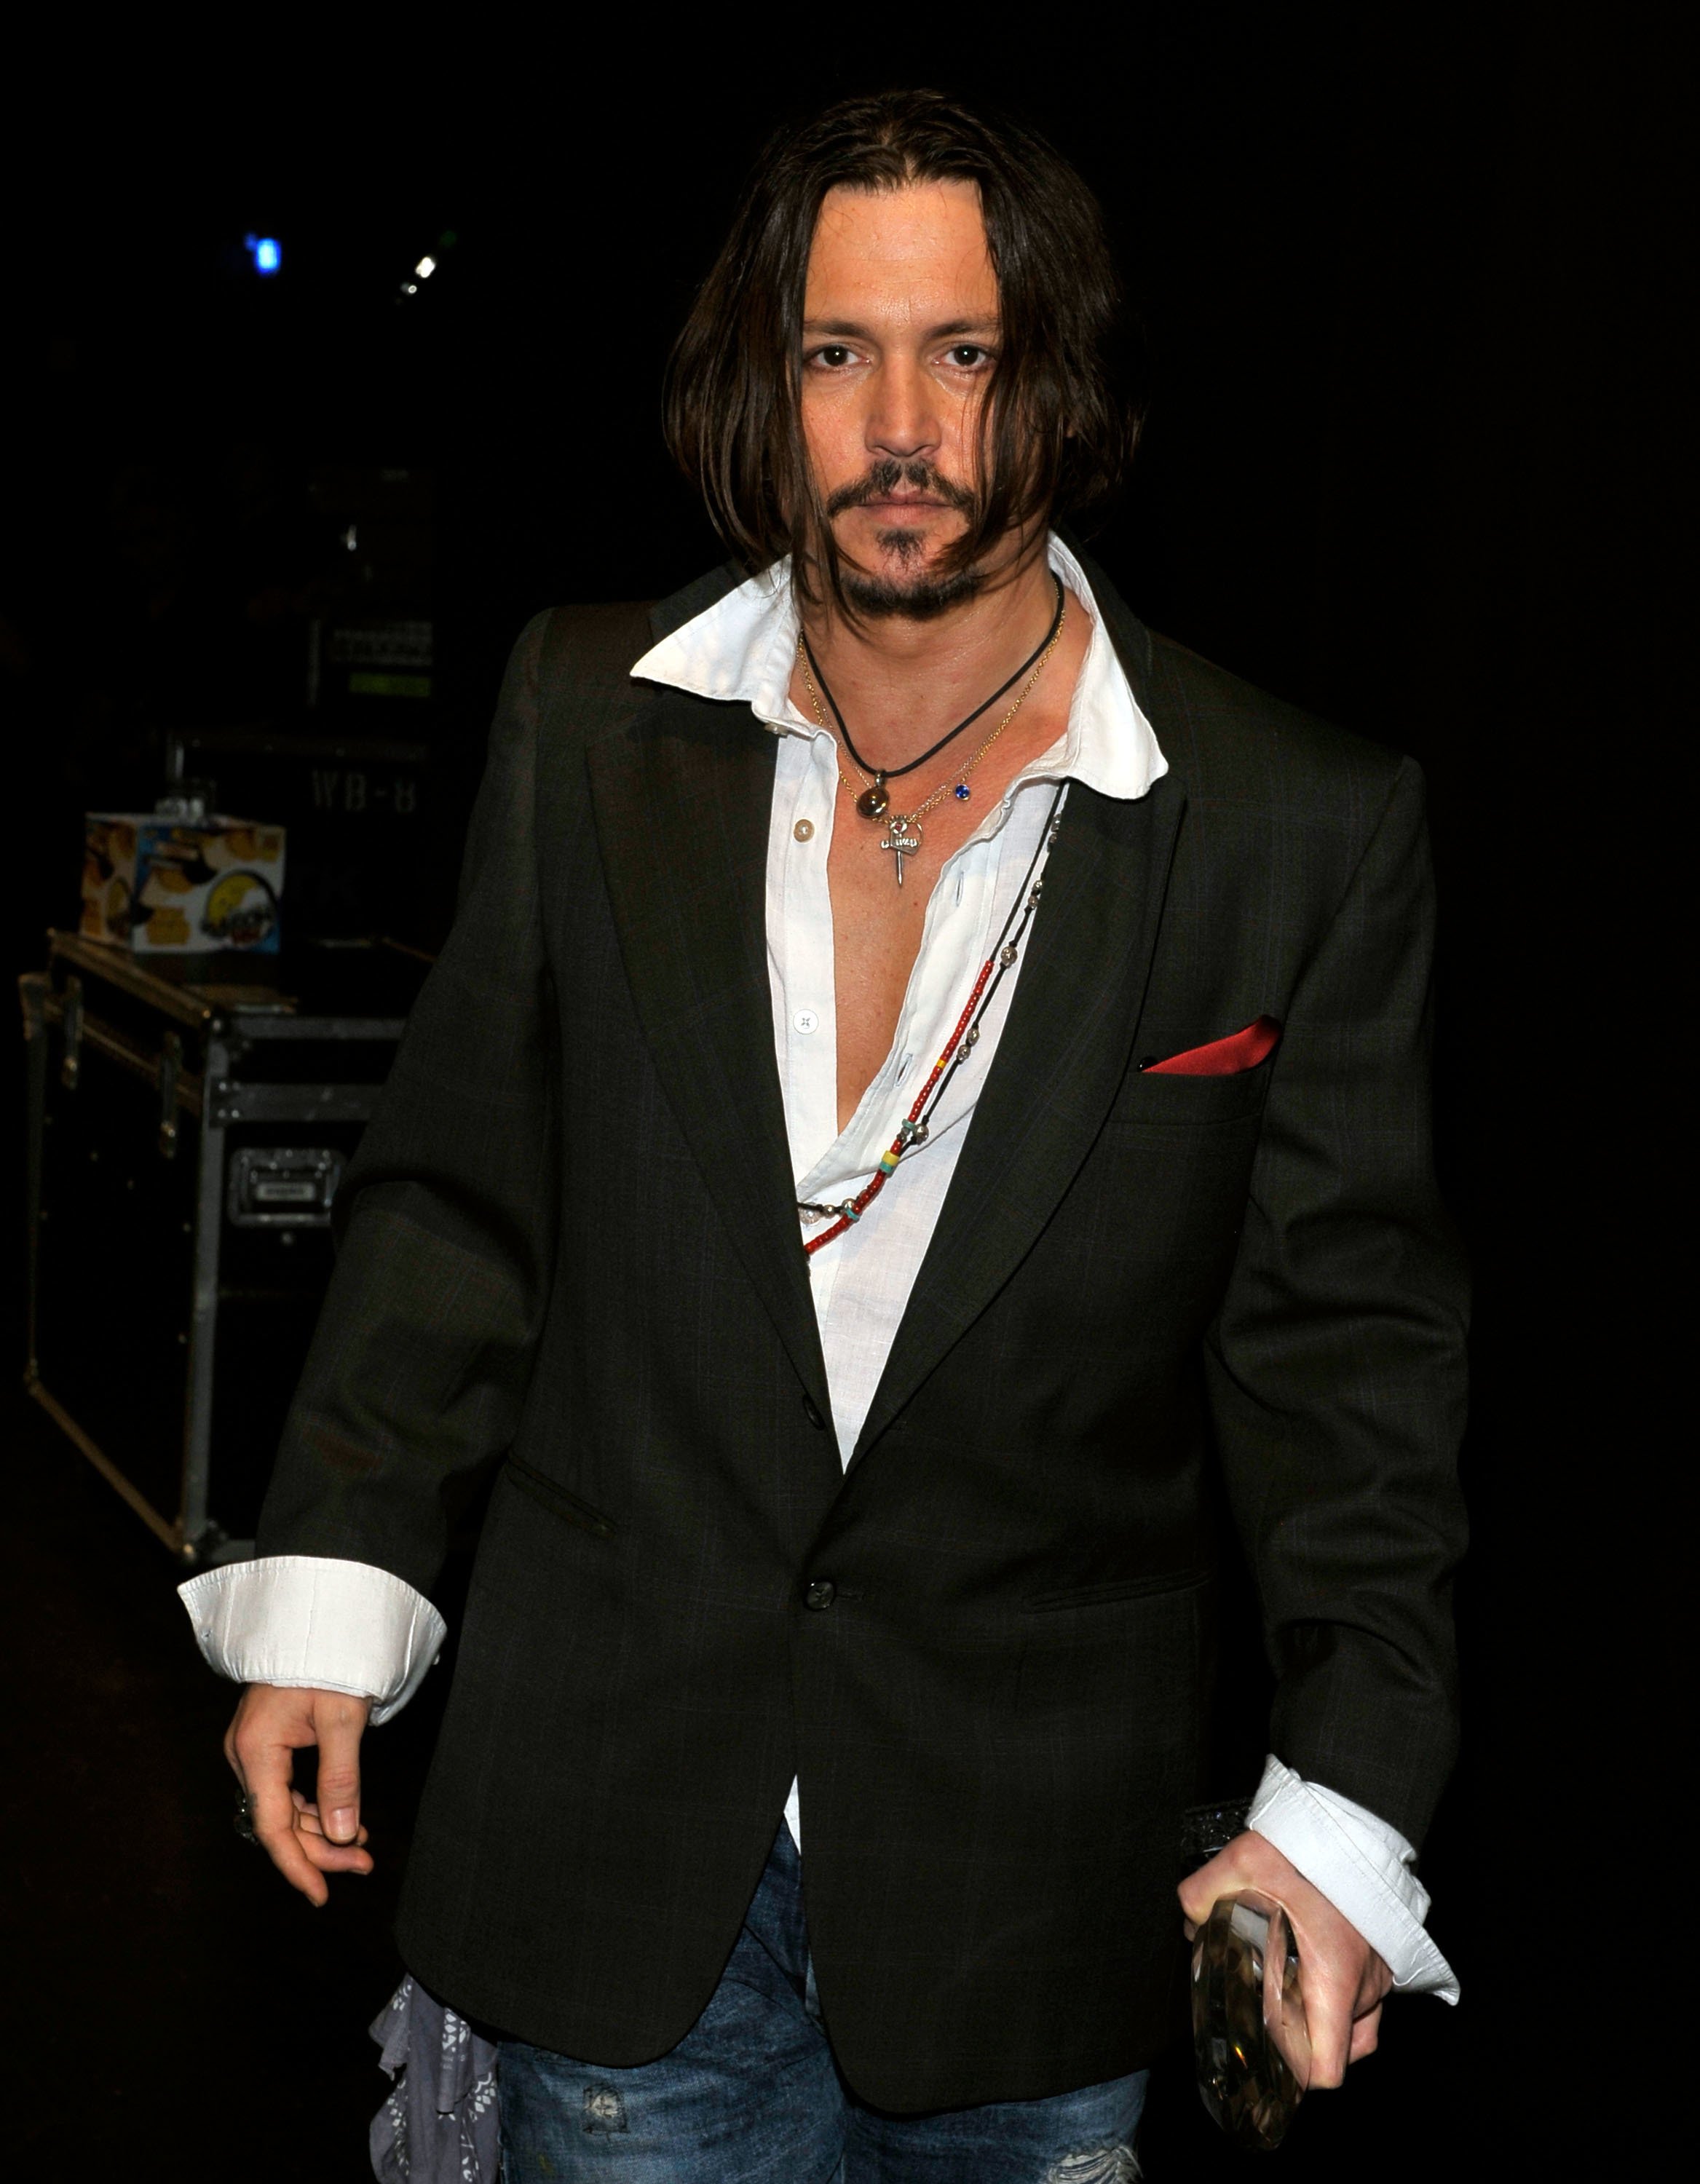 Johnny Depp poses backstage during the People's Choice Awards 2010. | Source: Getty Images